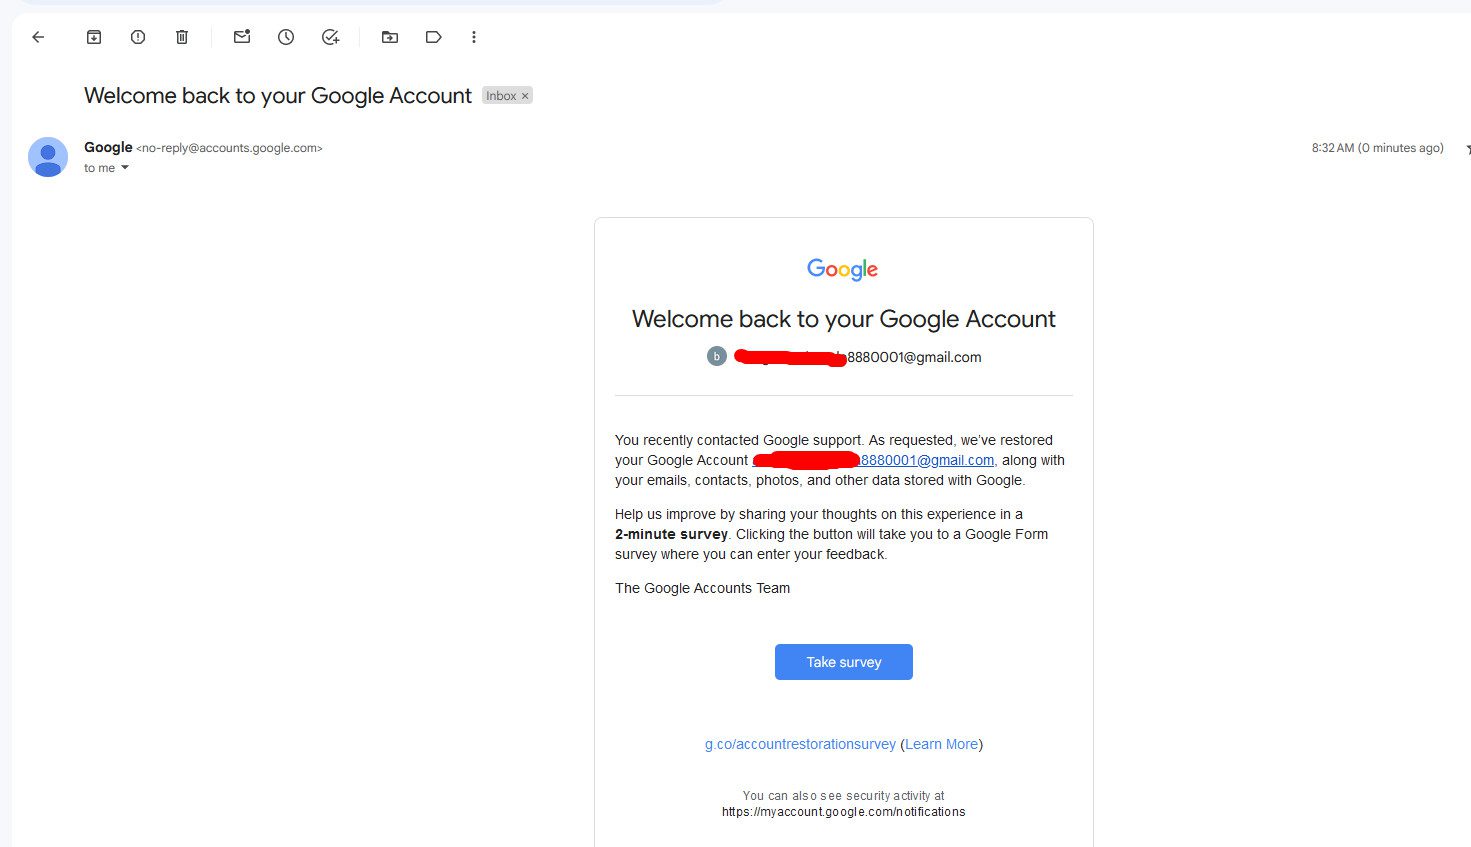 gmail auto appeal - appealed successfully - Google gets back to you